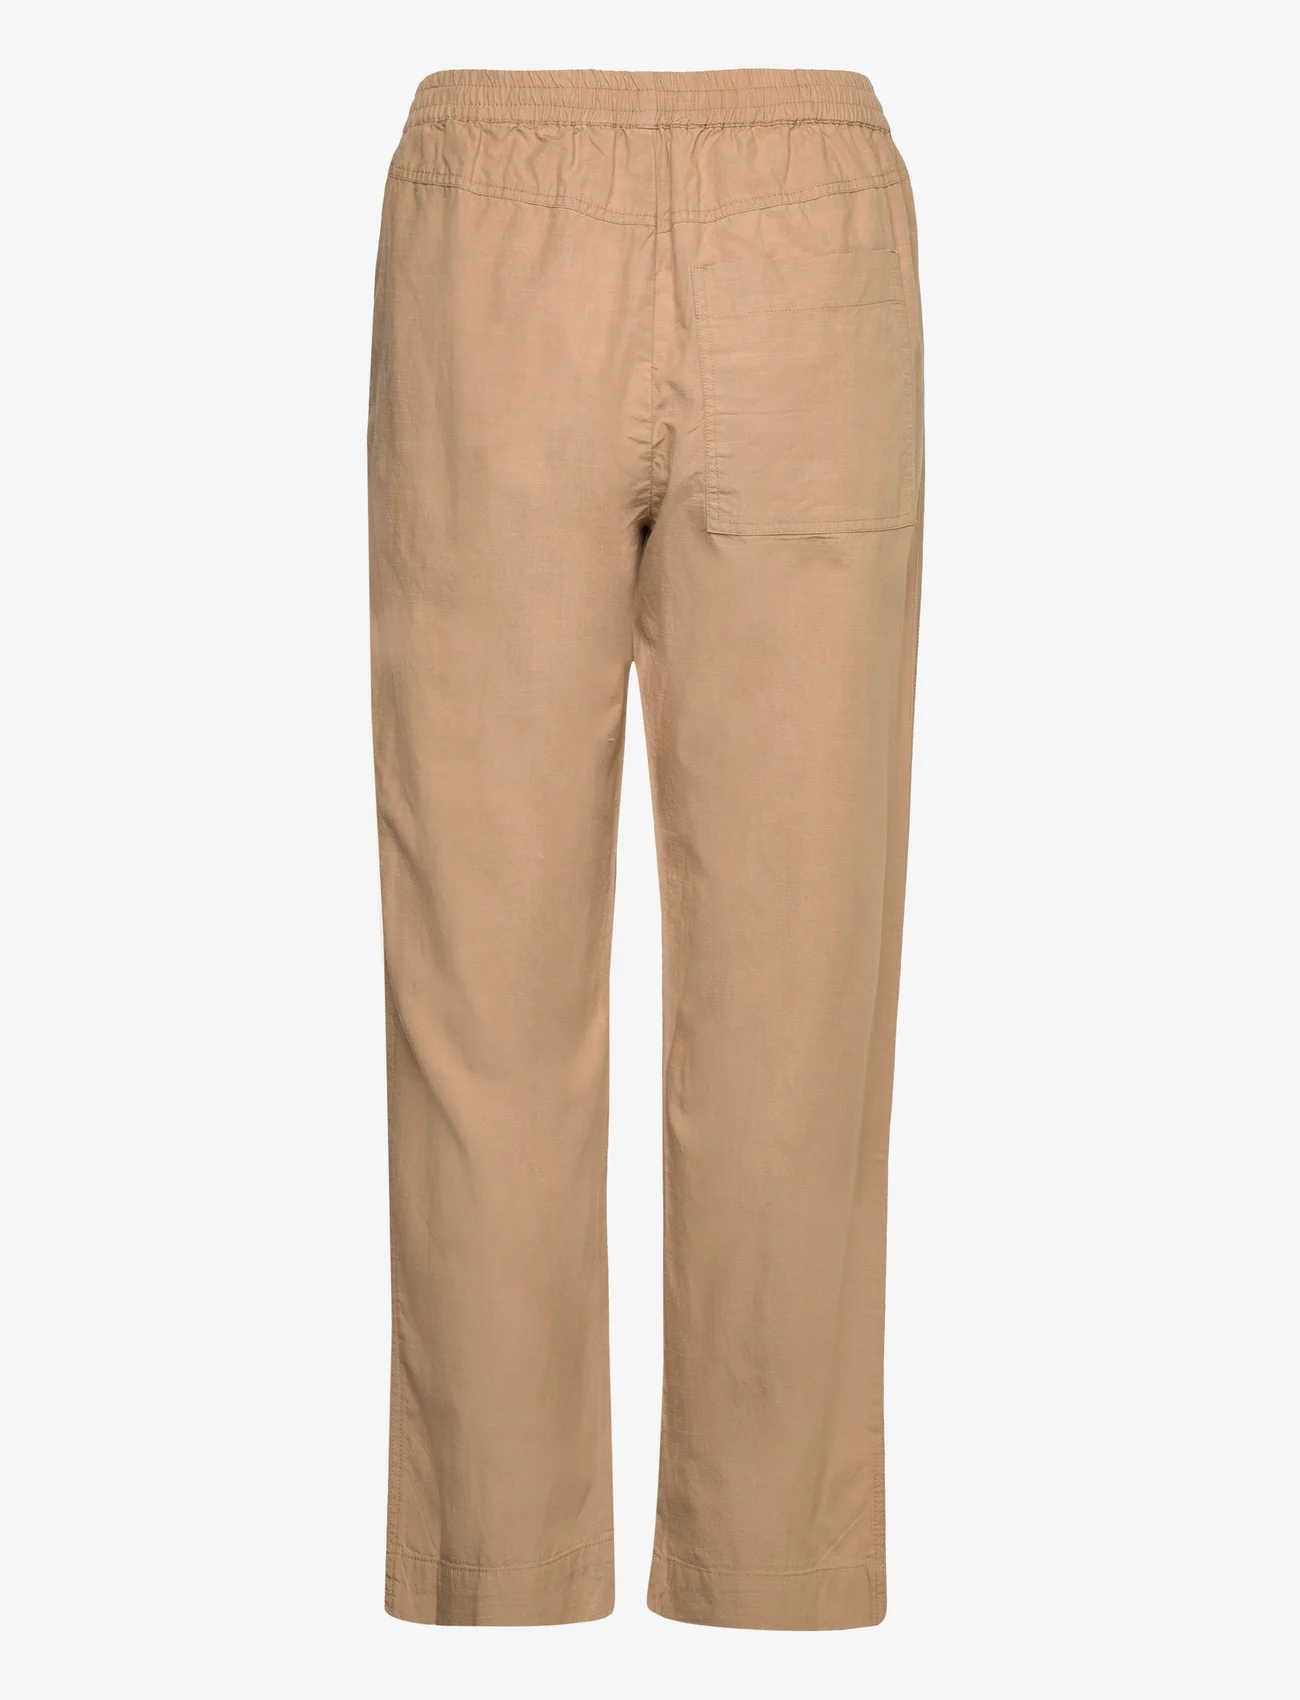 French Connection - ALANIA LYOCELL BLEND TROUSER - tiesaus kirpimo kelnės - incense - 1